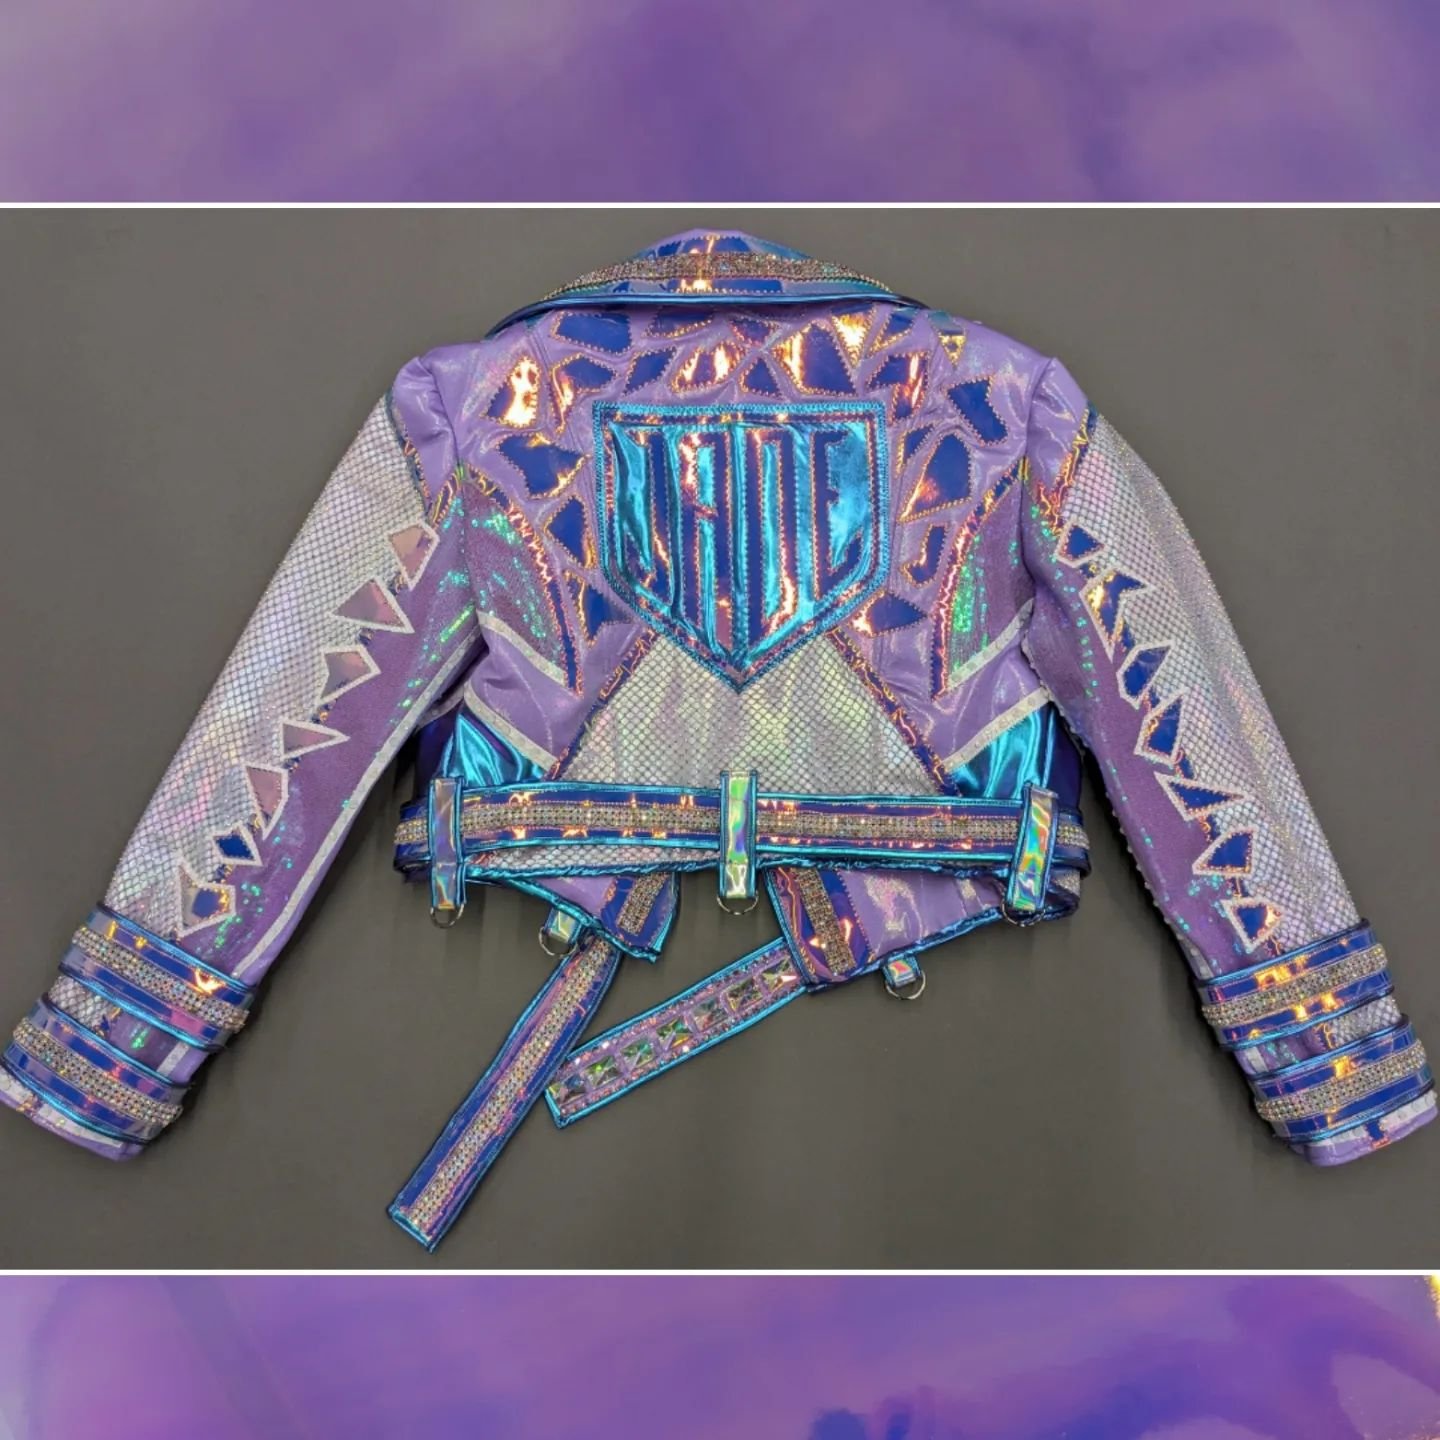 I absolutely love how this jacket and gear for @jadecargill turned out! The mix of fabrics and trims is absolutely stunning in person and I am just so pleased with it!! Scroll through for some close up shots of the details! 
💜🤍💜
@wwe #wwe #jadecar